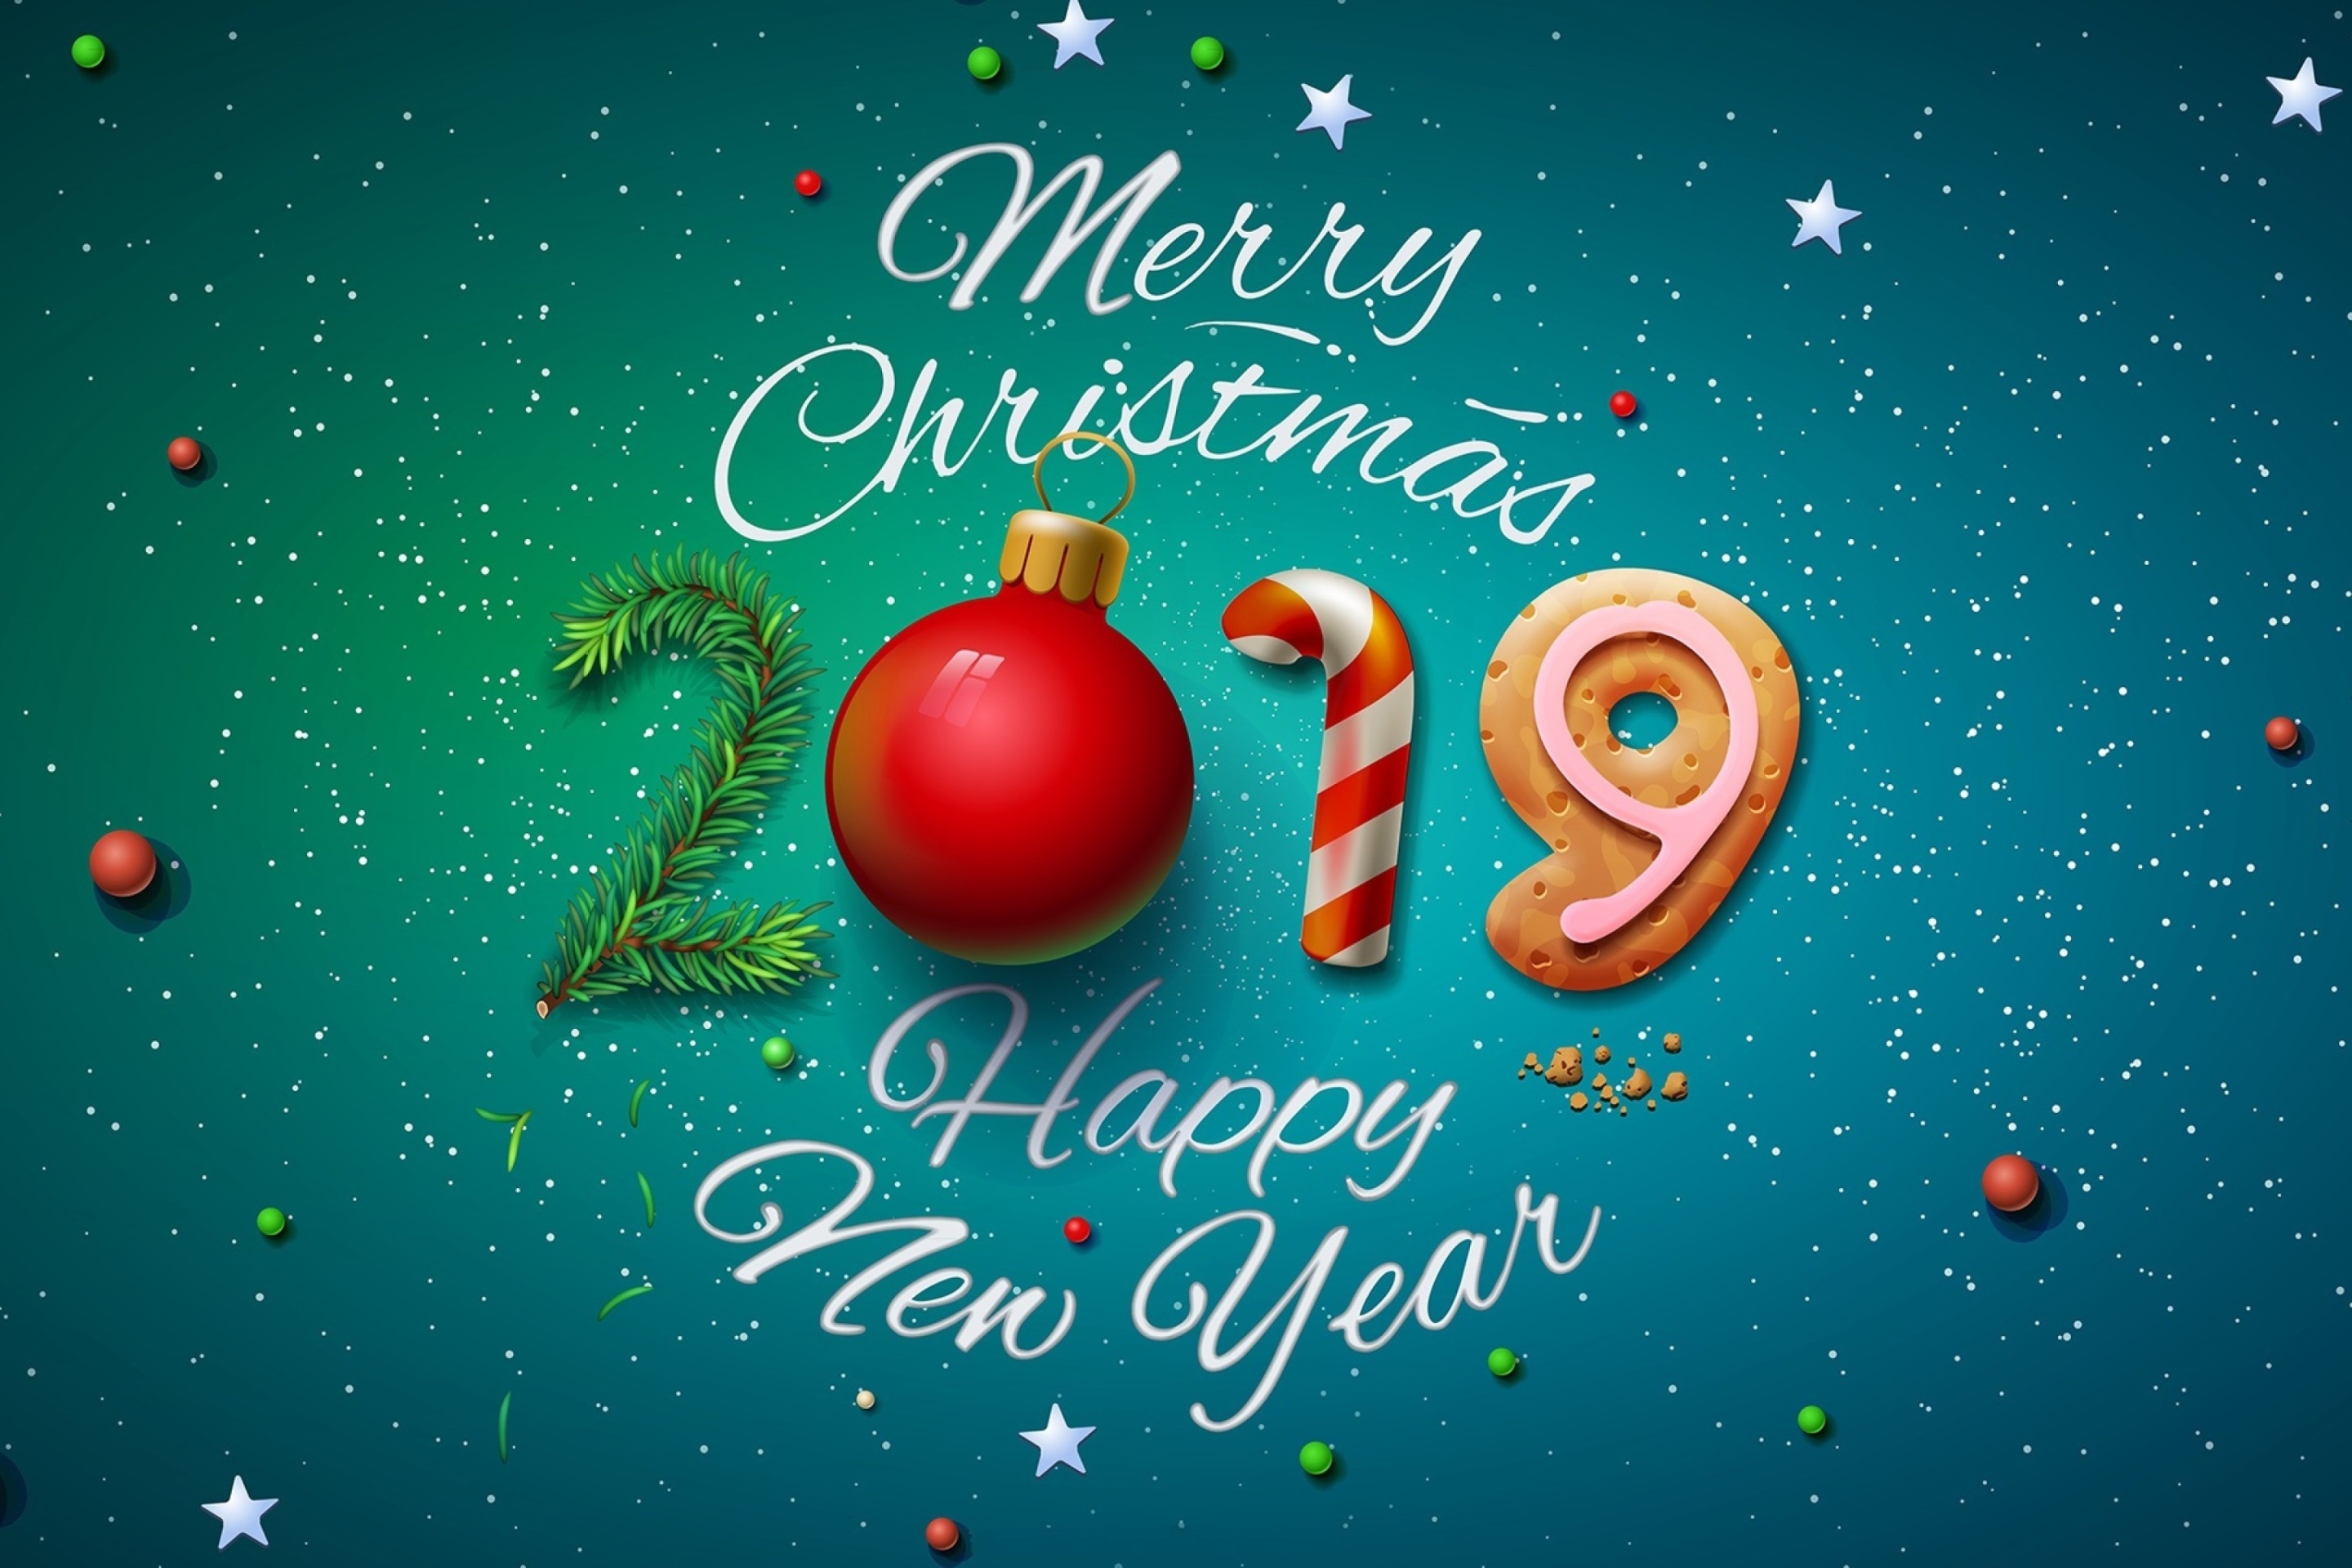 Das Merry Christmas and Happy New Year 2019 Wallpaper 2880x1920